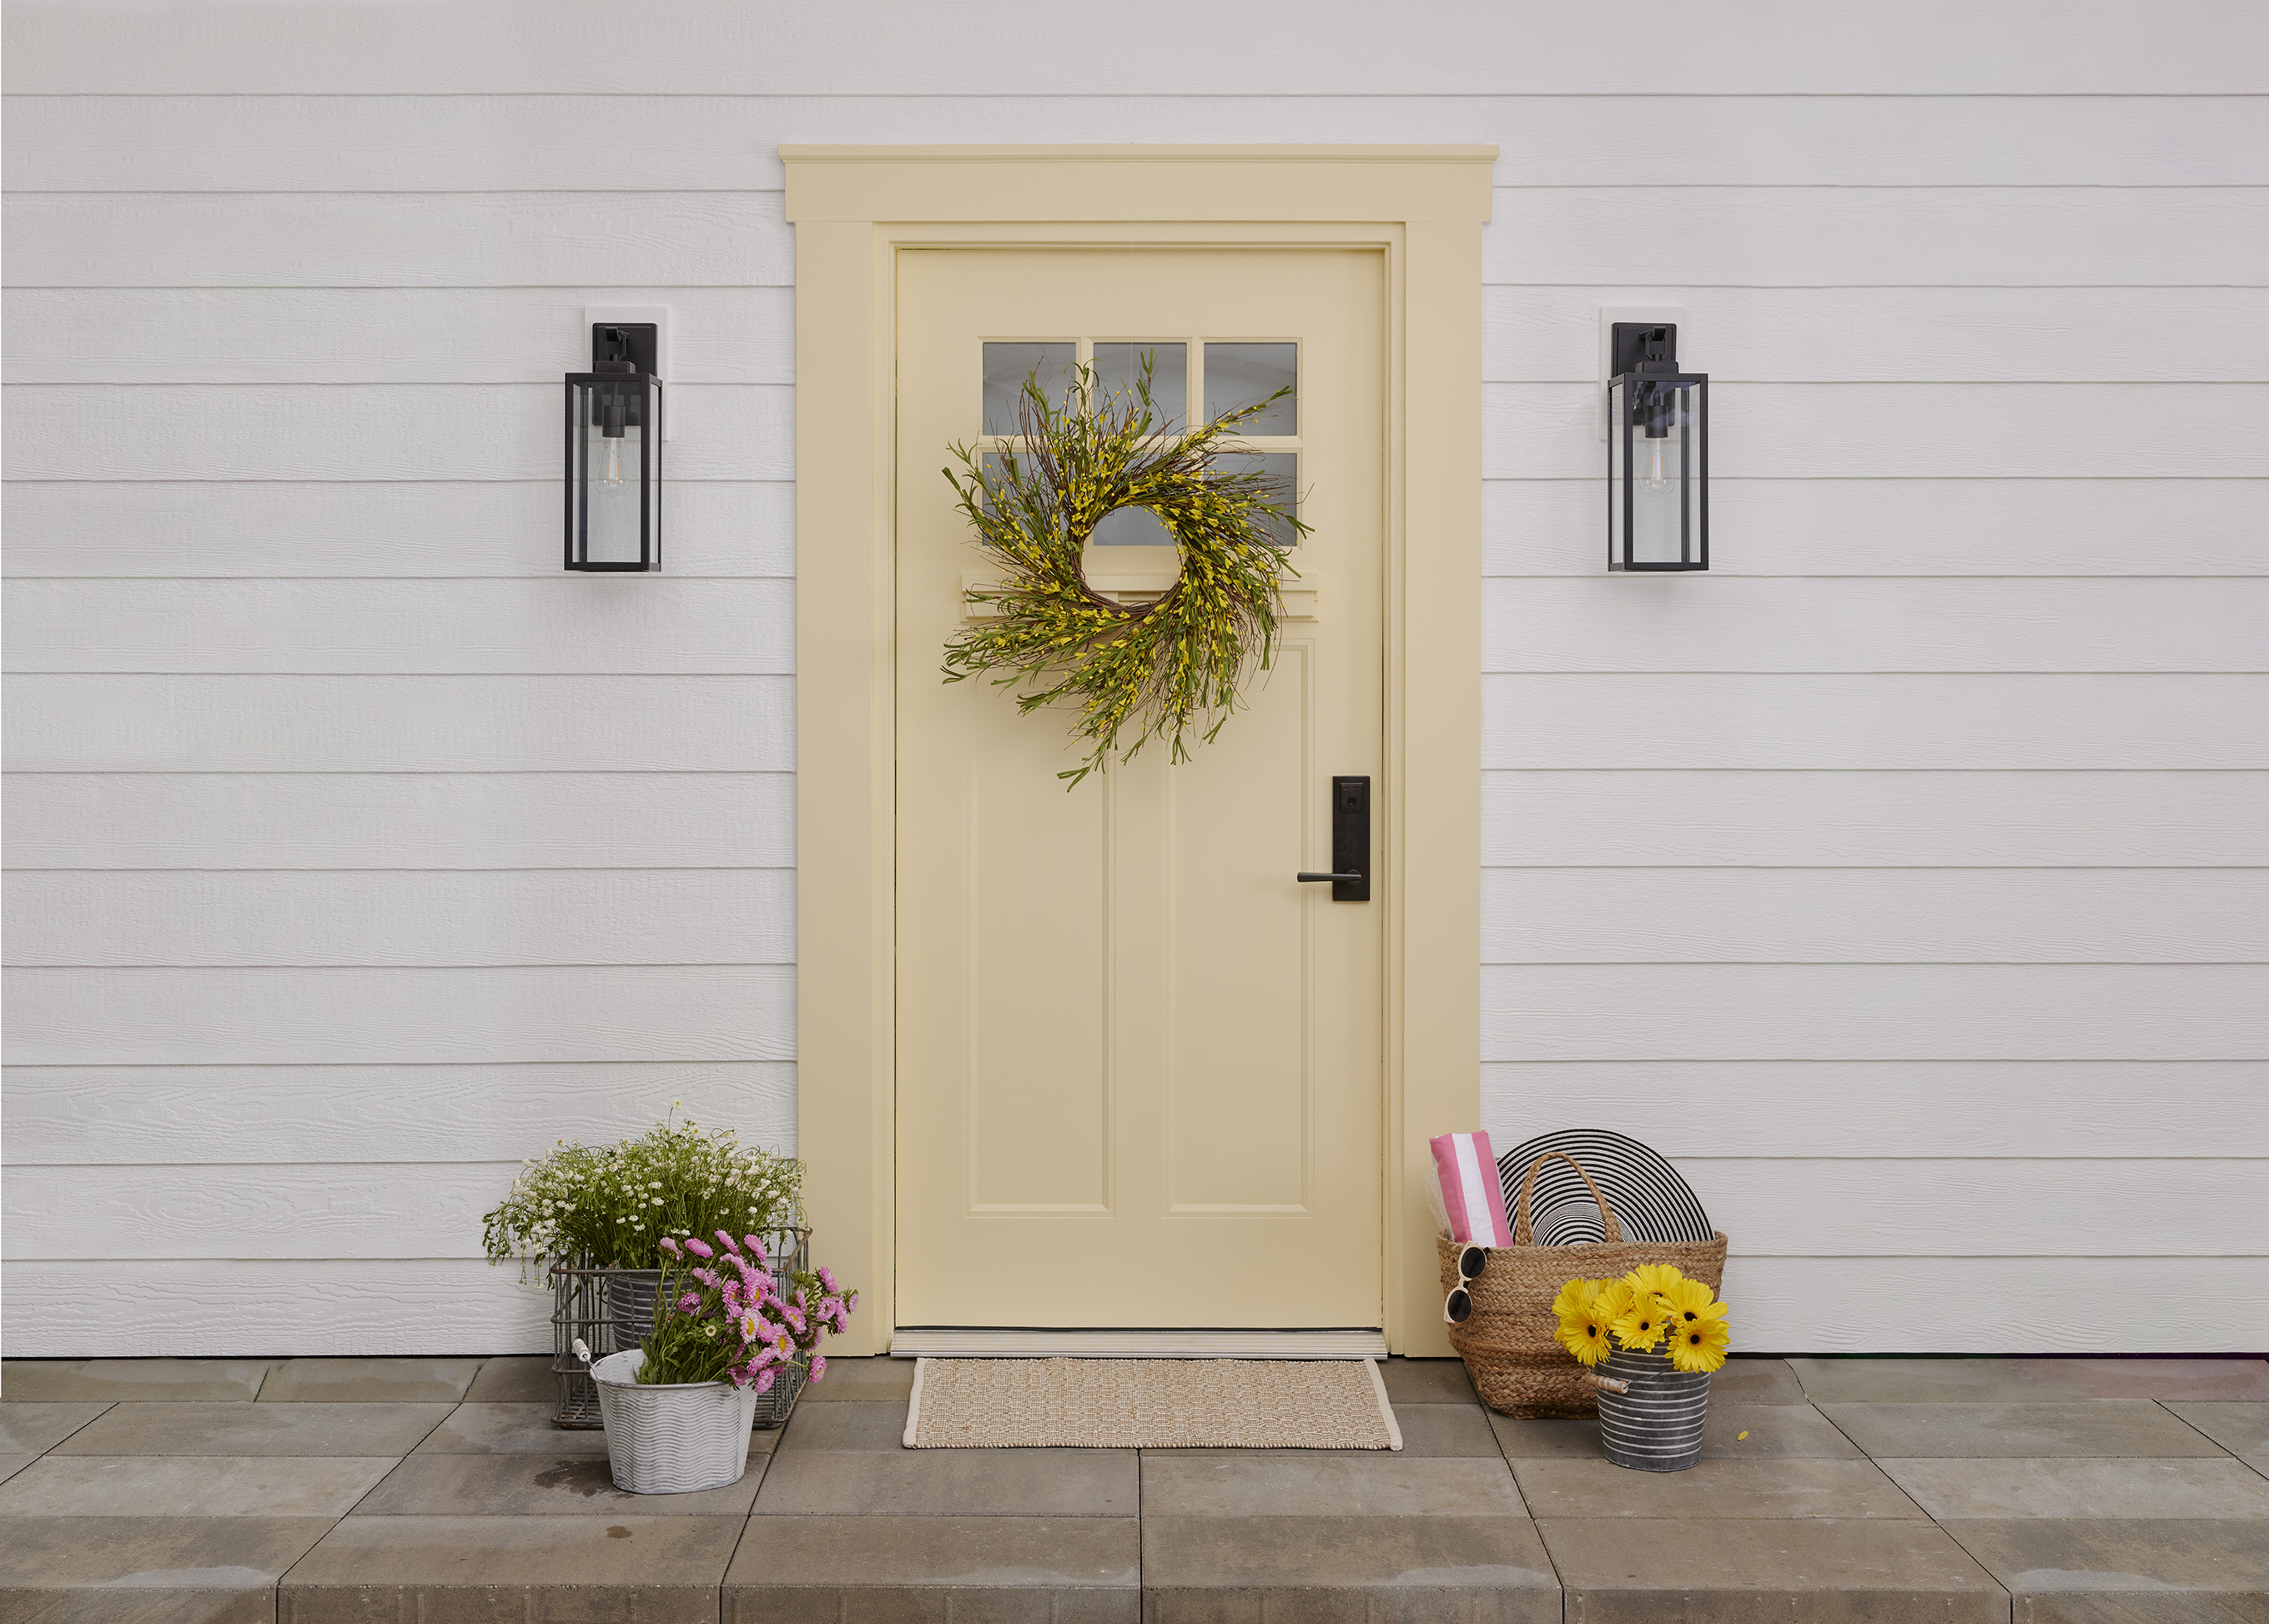 A buttery yellow door with a wreath and doormat. A beach basket and containers with fresh-cut flowers rest near the door.